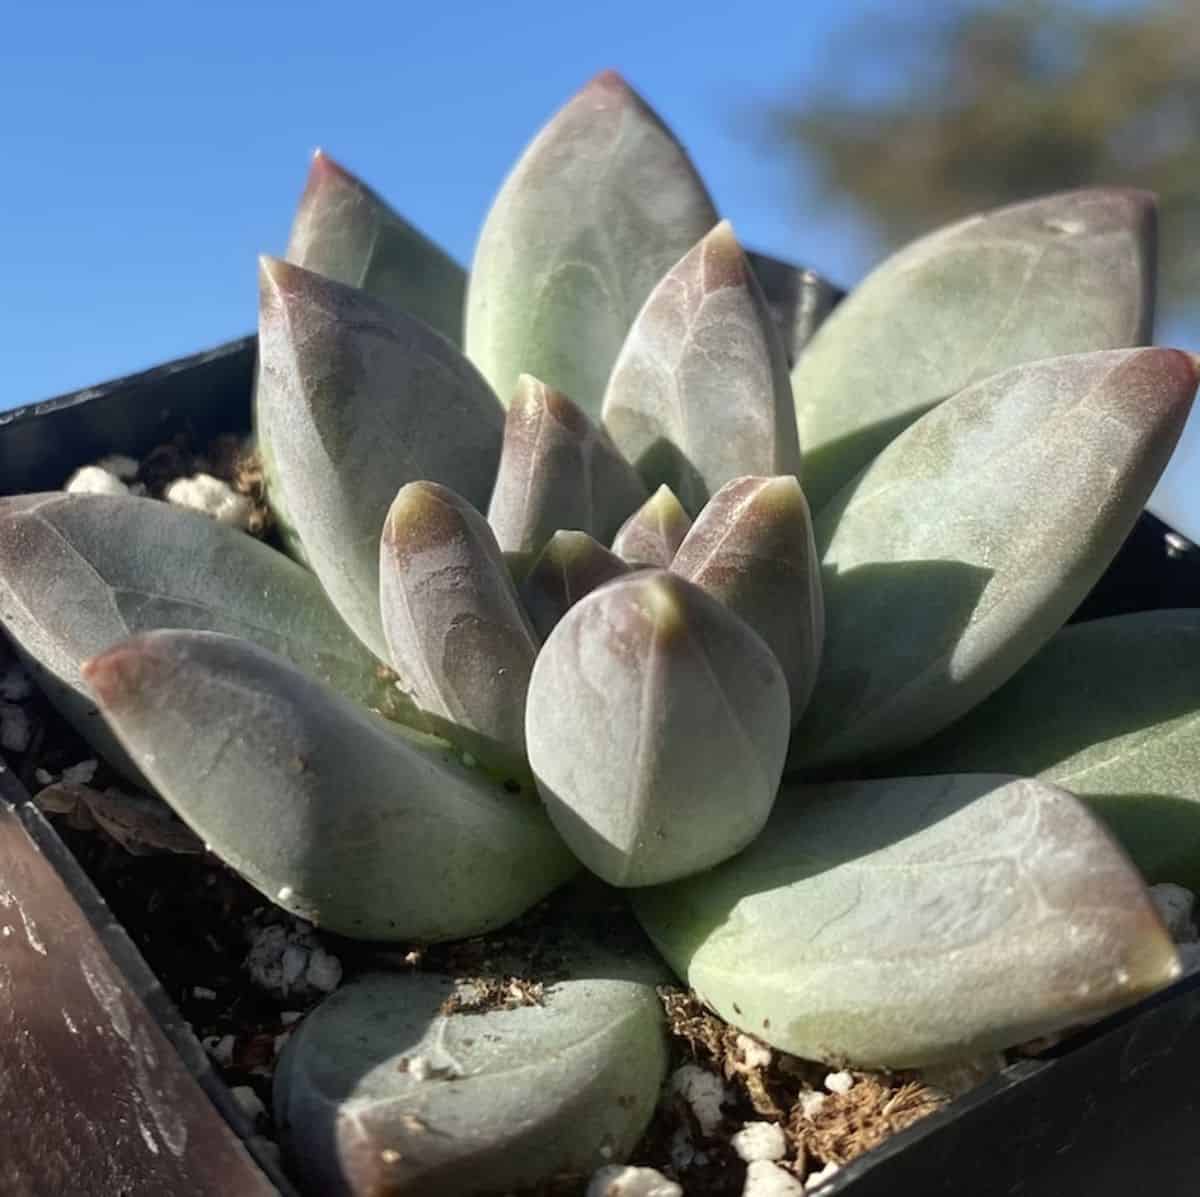 Pachyphytum compactum grows in a pot.